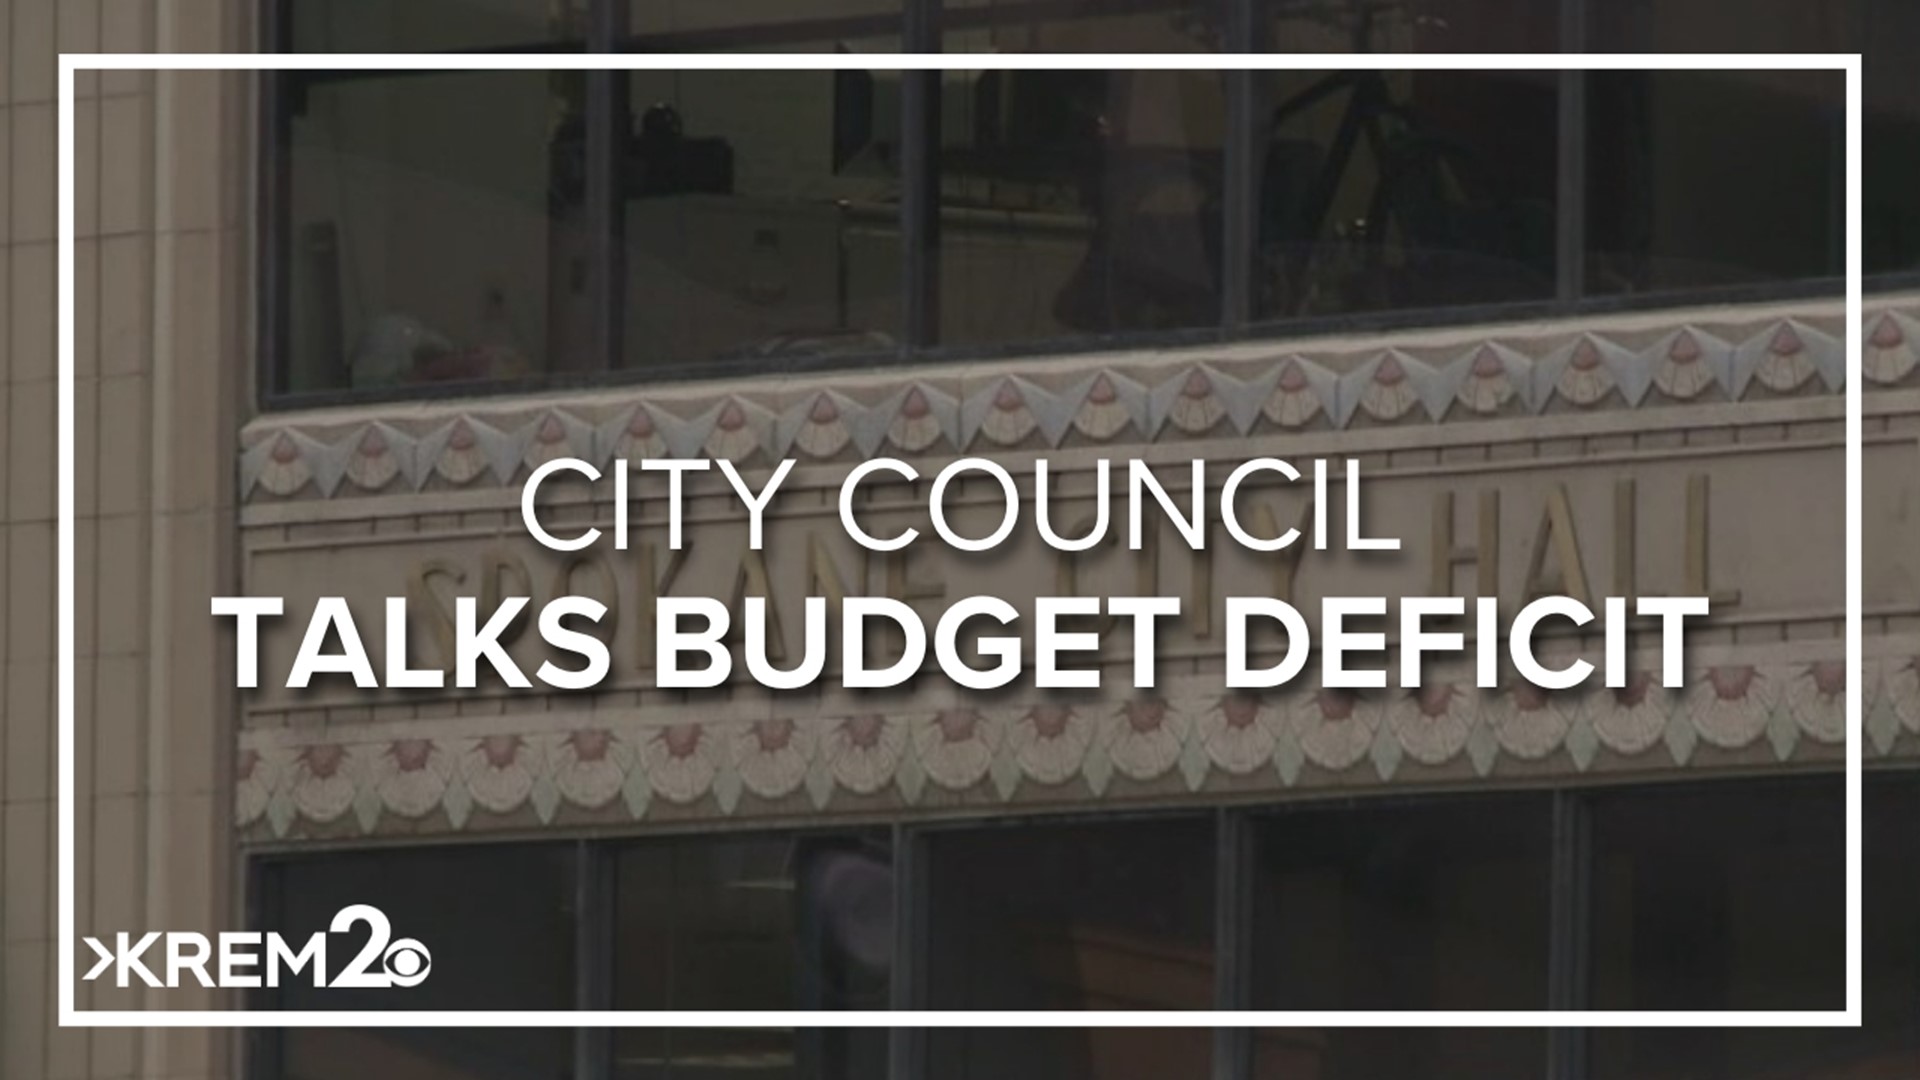 Despite not having a full understanding of the increasing inflation rates, council still had to make financial decisions.